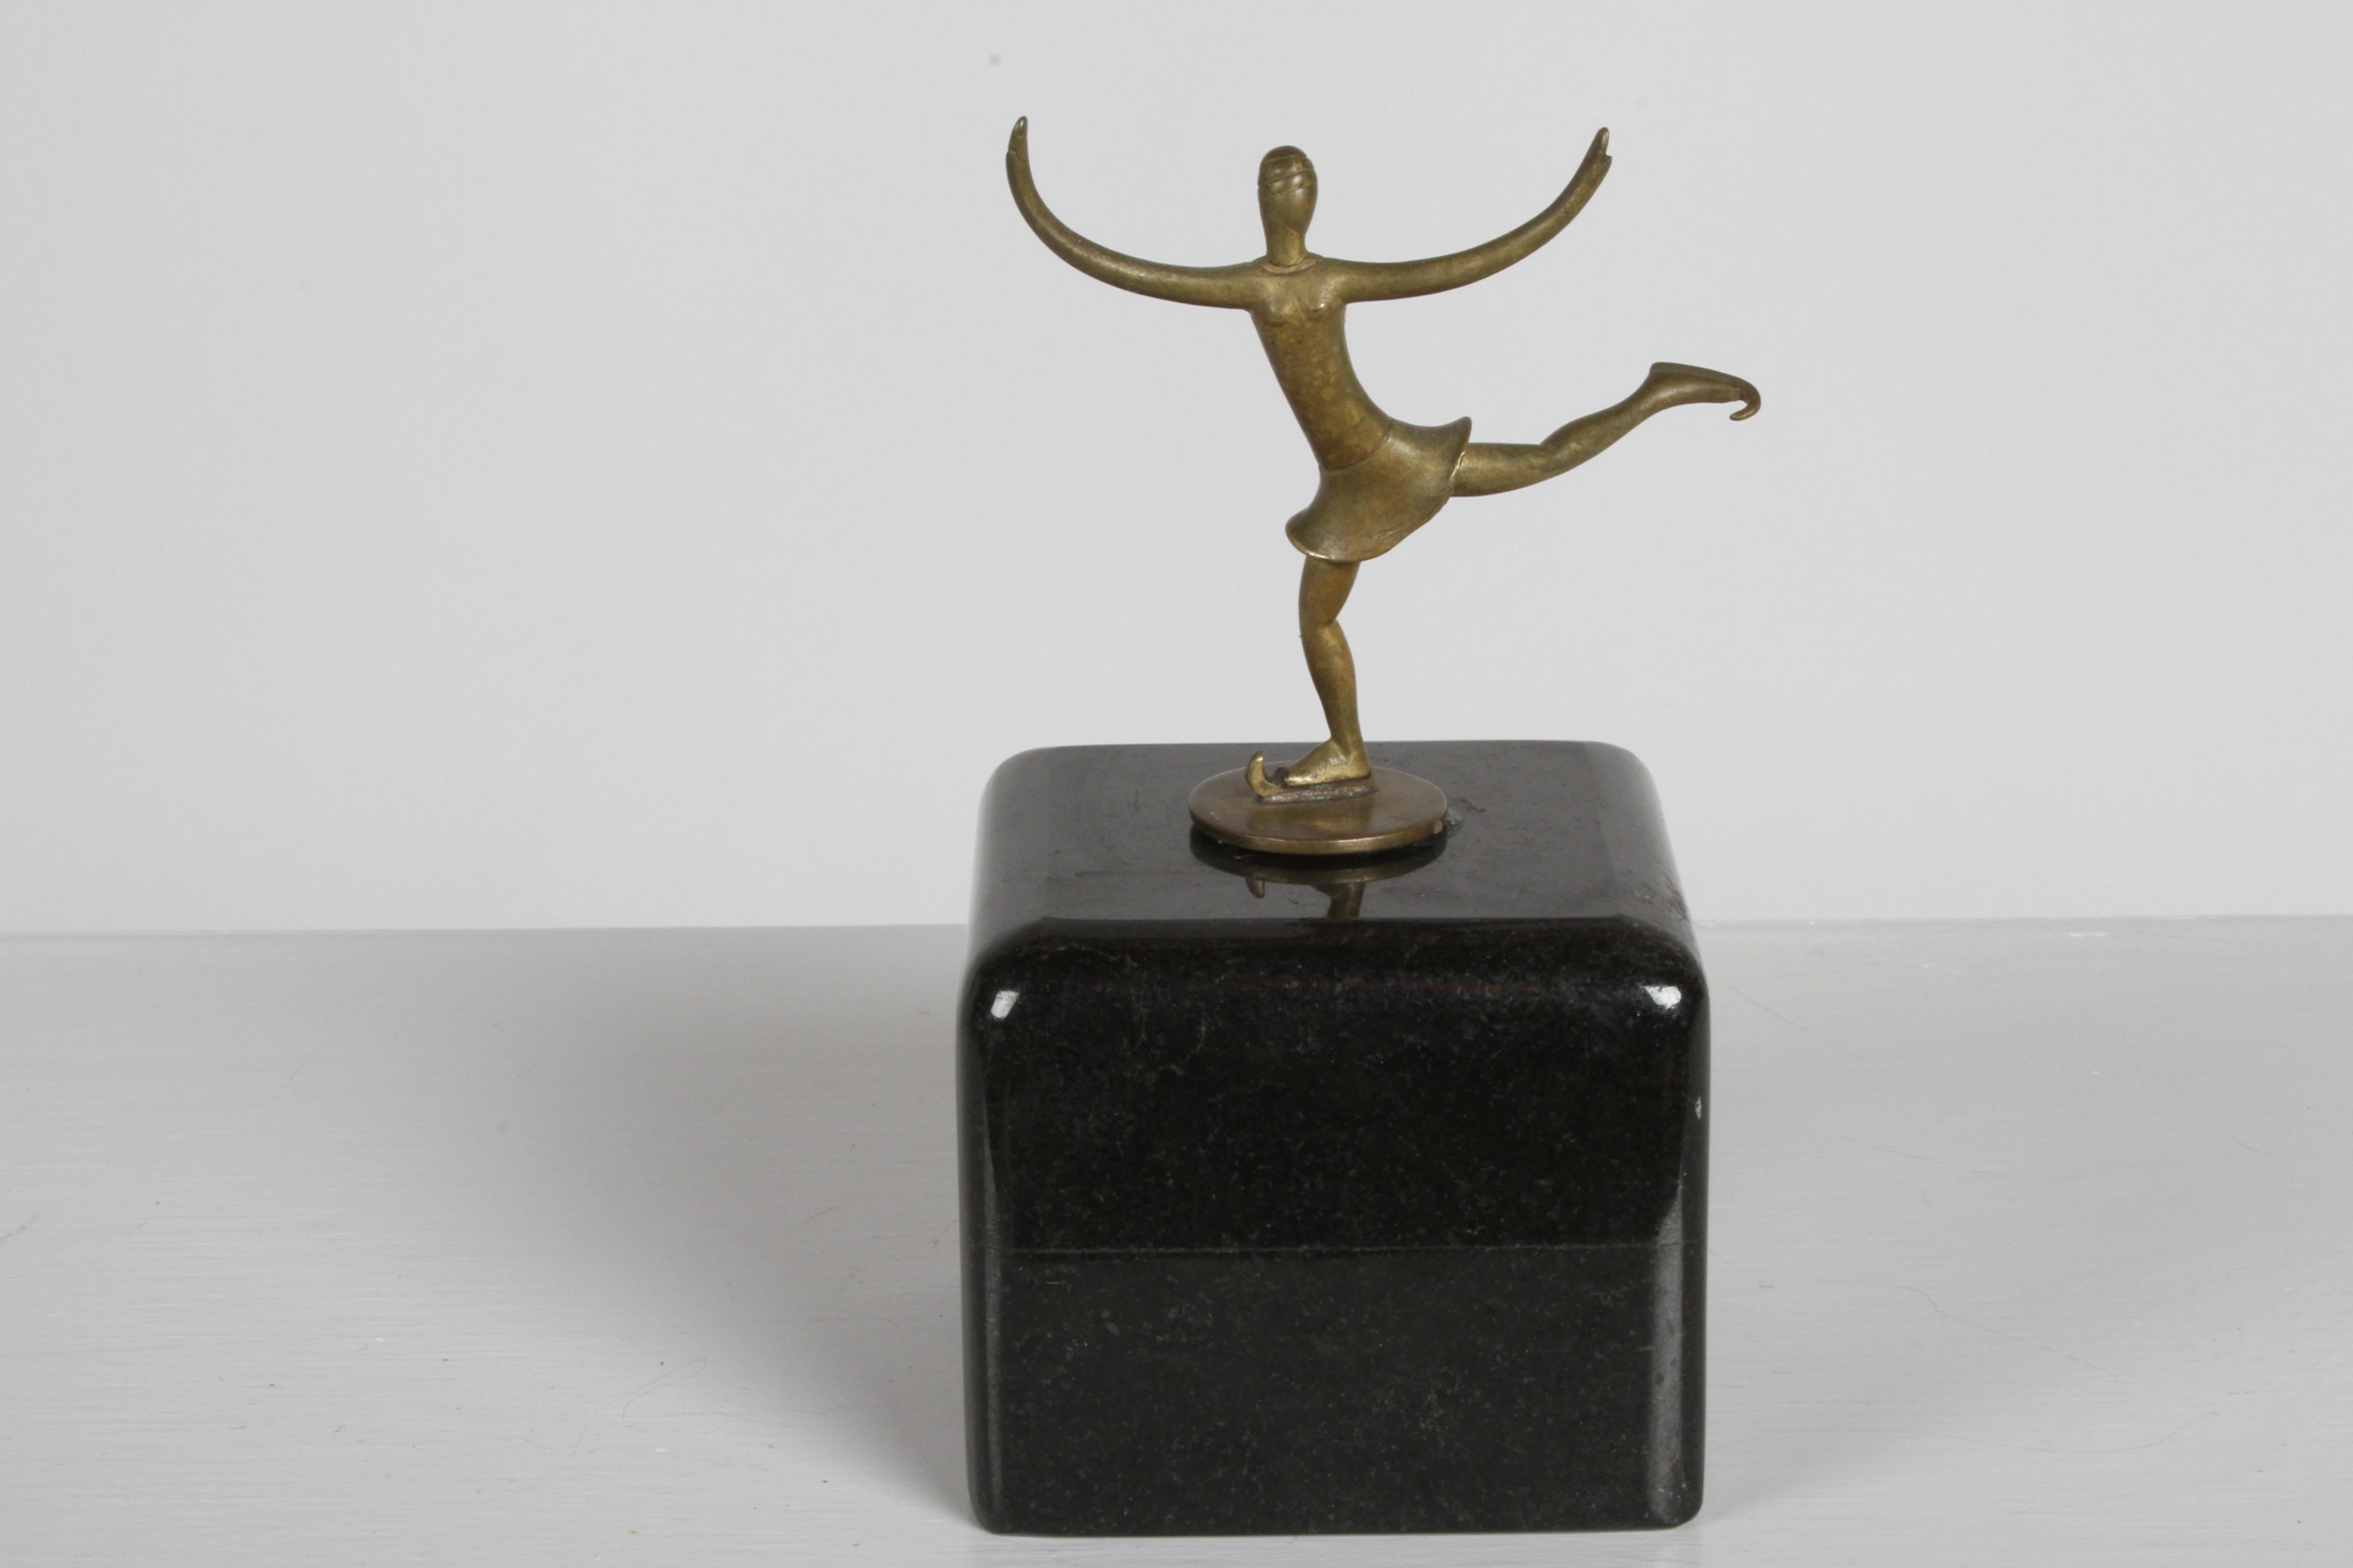 Karl Hagenauer for Werkstätte Hagenauer Wienstamp - stamped WHW made in Austria, circa 1920s bronze miniature female figure ice skater sculpture. Mounted on marble block with museum putty, removable. Mounted by previous owner. Marble base is 3